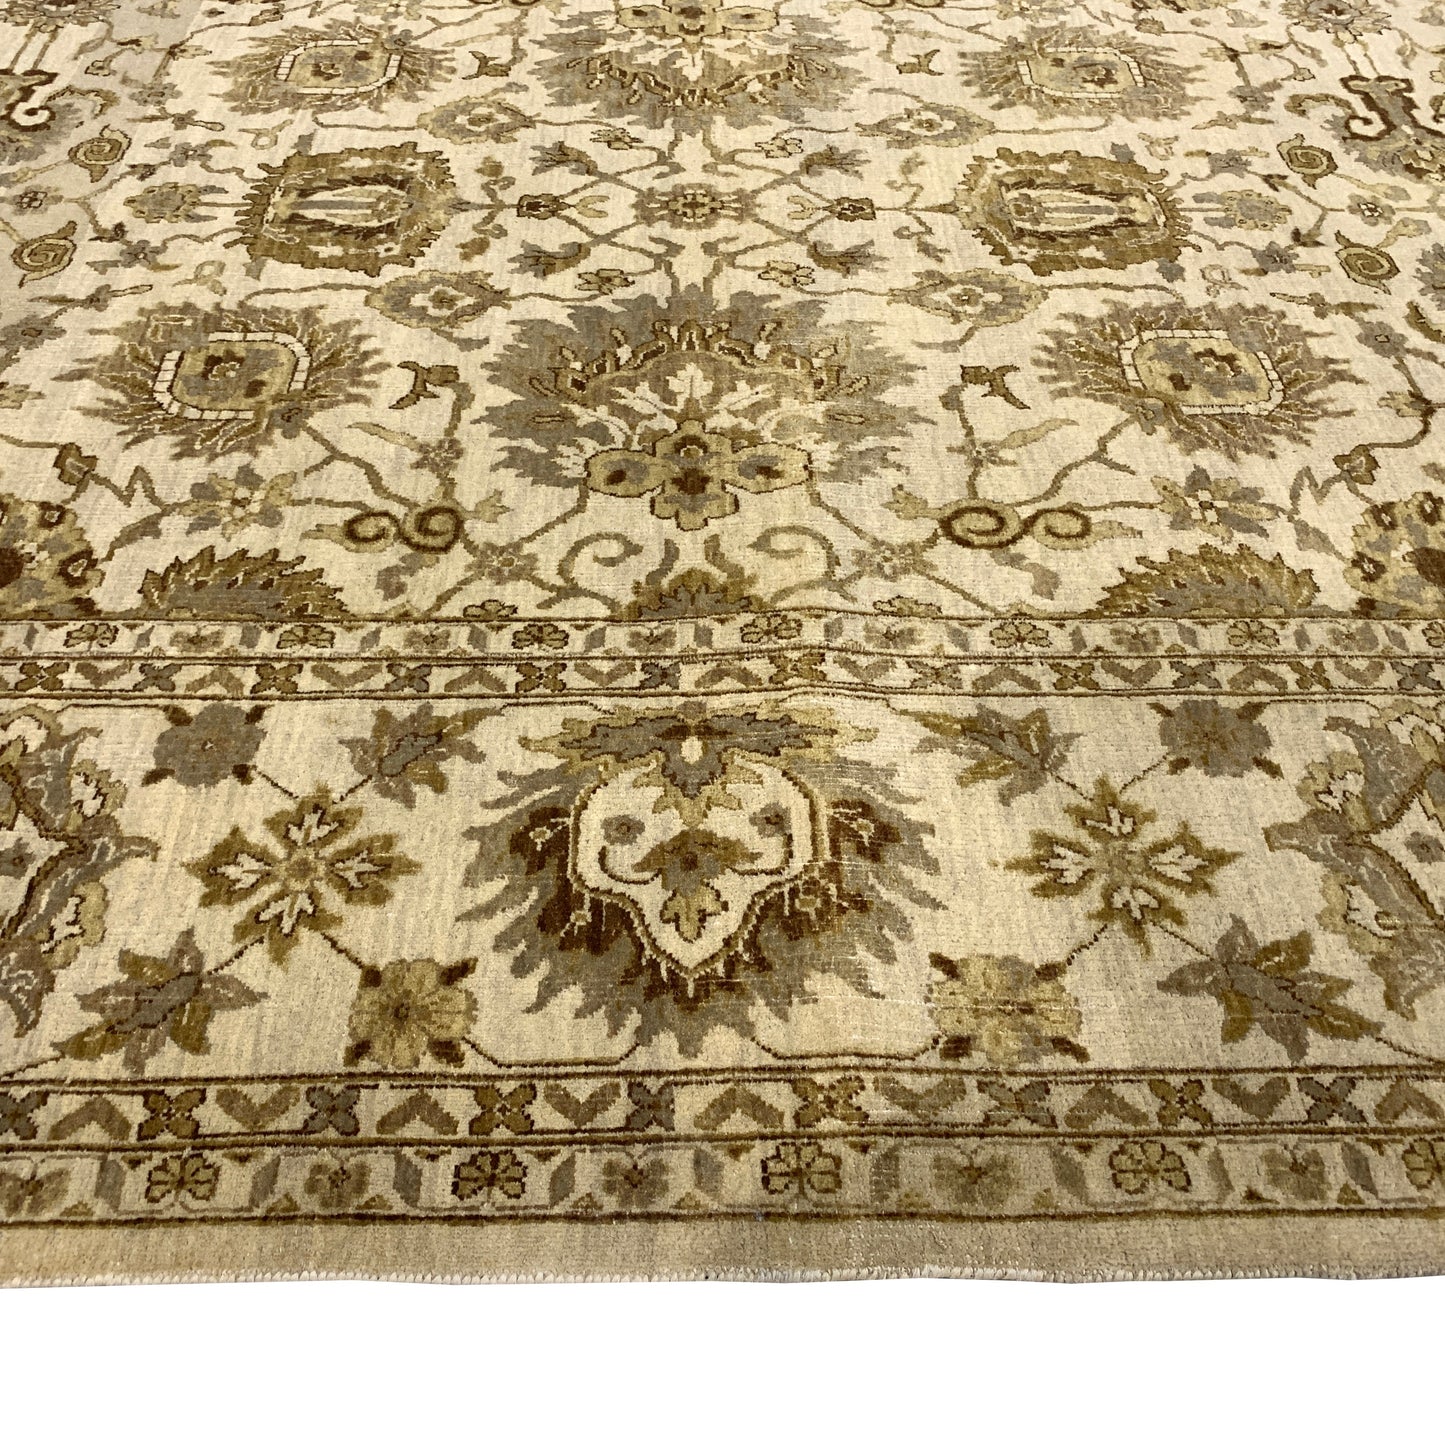 Get trendy with Mughal Beige, Brown and Brown Traditional Ushak Pure Wool Luxury Handknotted Area Rug - Traditional Rugs available at Jaipur Oriental Rugs. Grab yours for $3299.00 today!